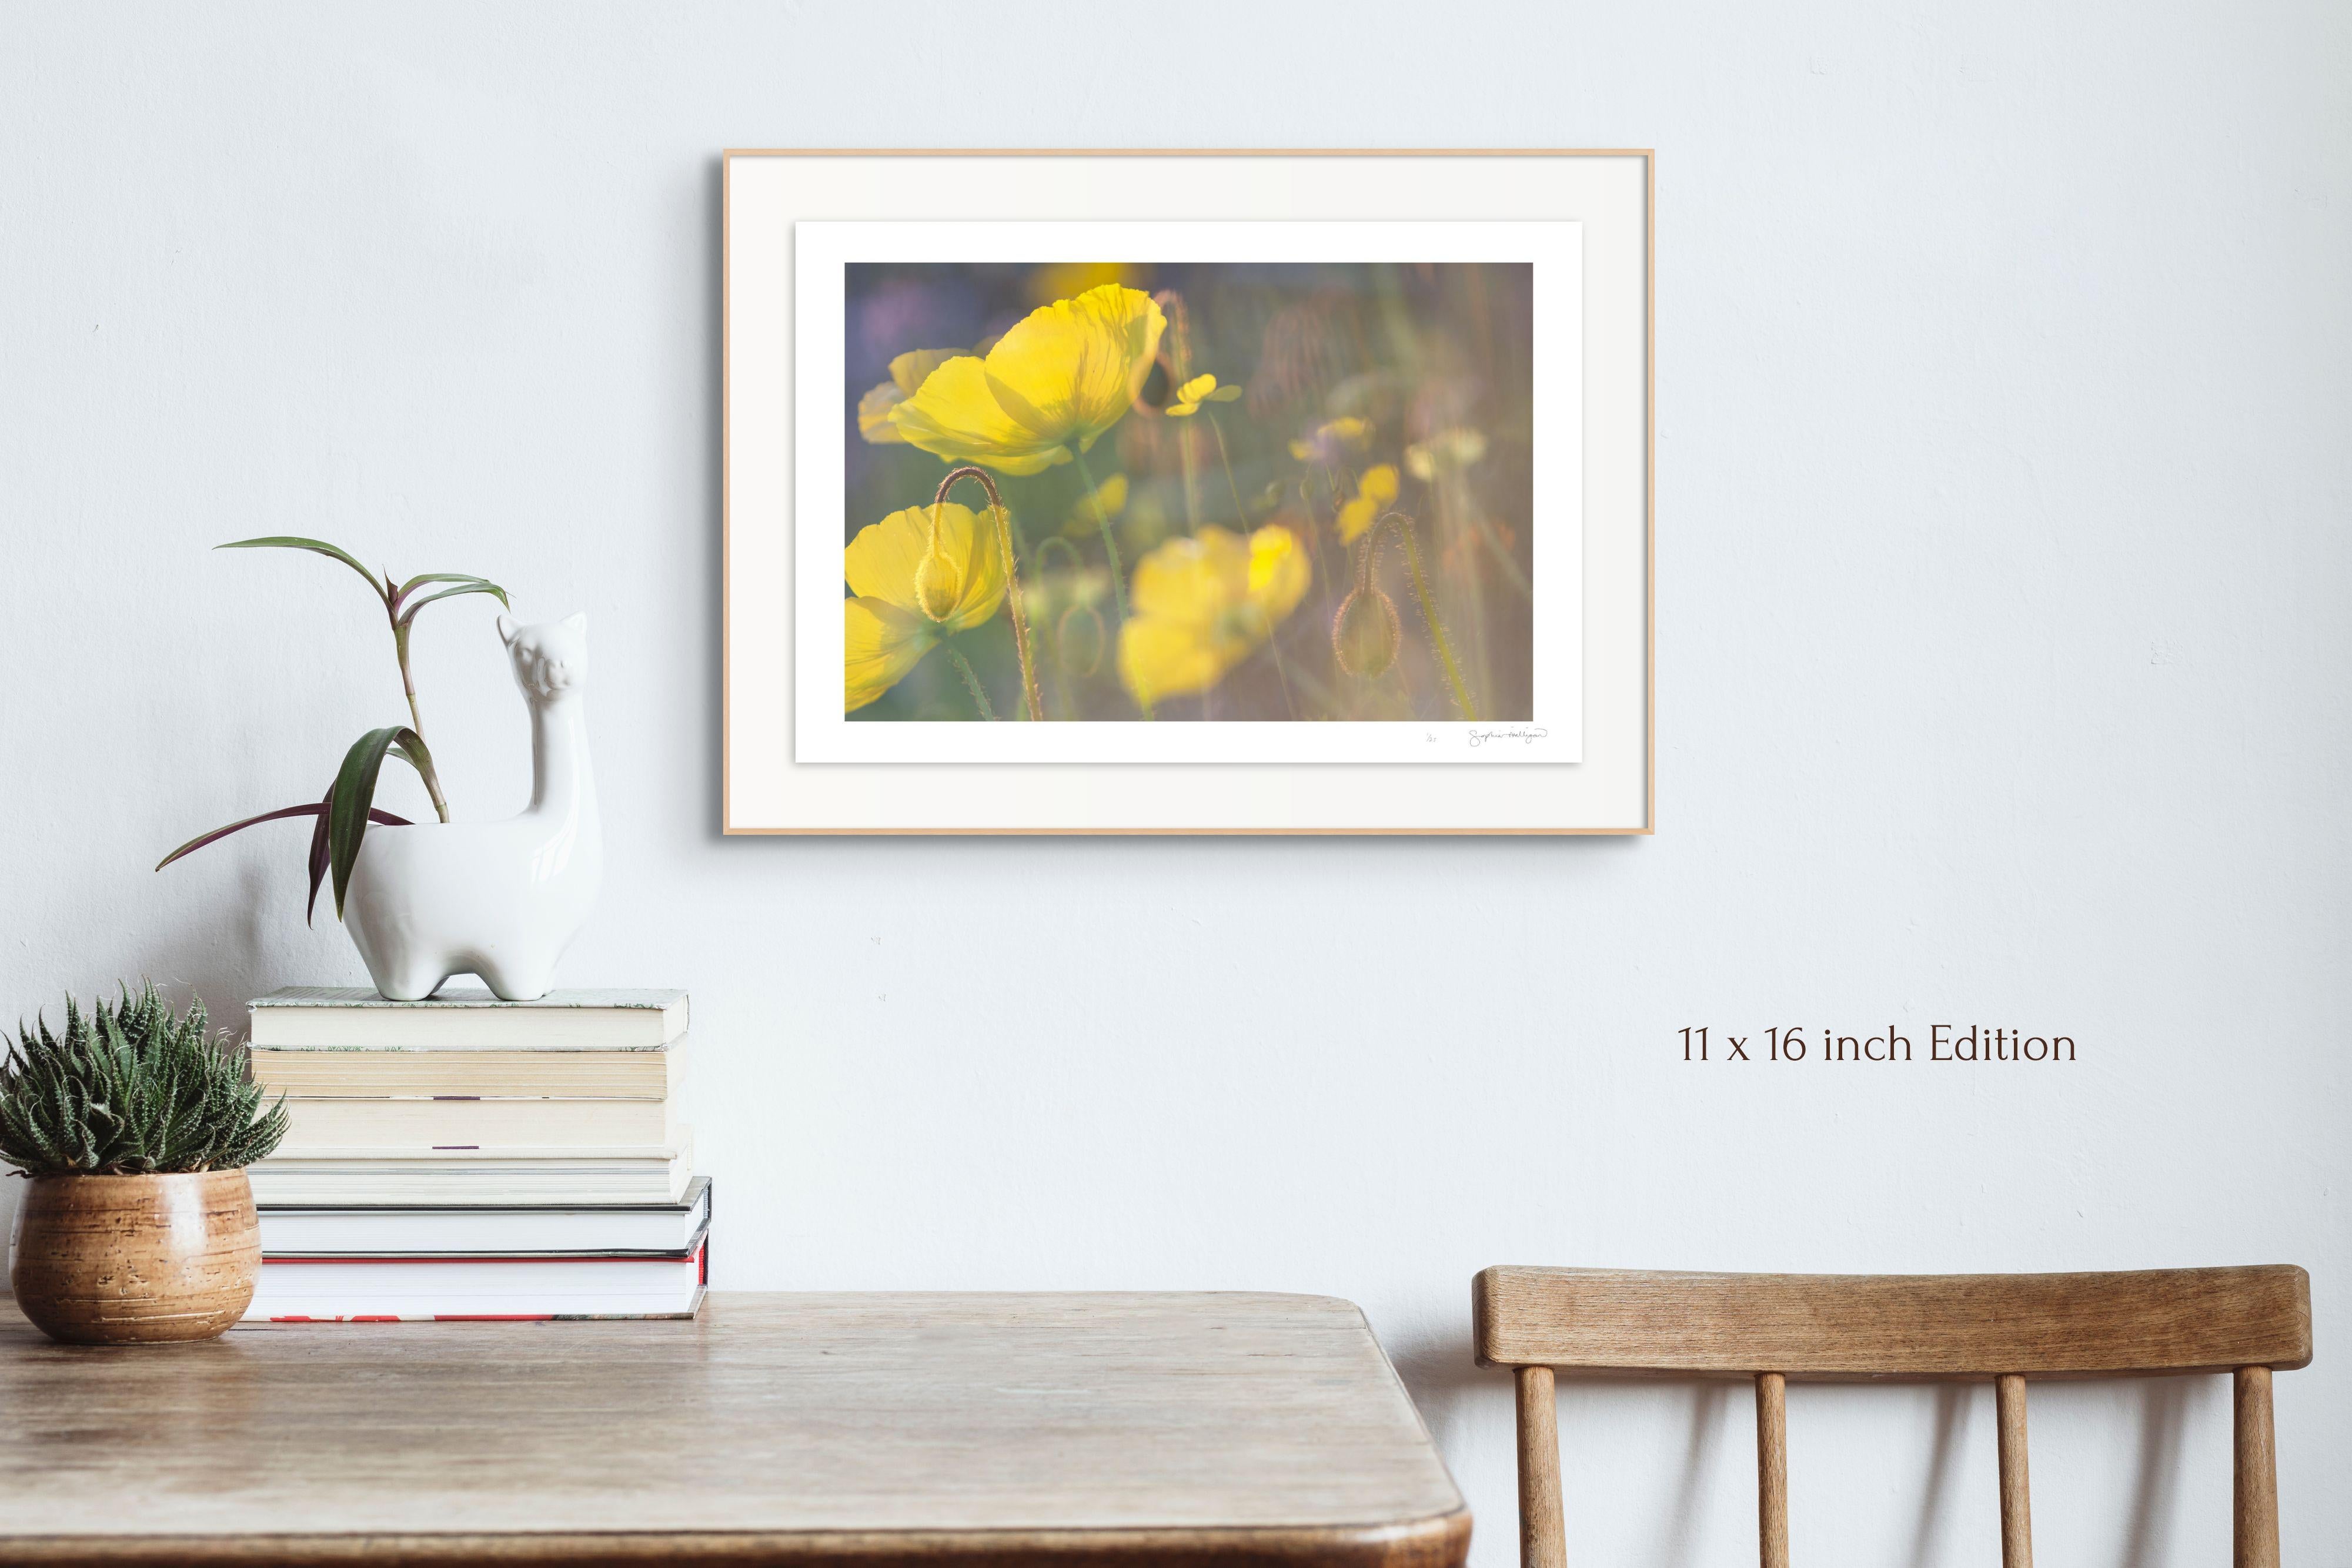 'Yellow Poppies' ('Mono No Aware' Series)
Limited edition archival photograph. Unframed, hand signed and numbered
_________________

Buds, blooms, and the fading glories of Icelandic poppies capture the glow of the late afternoon sun. Woven together